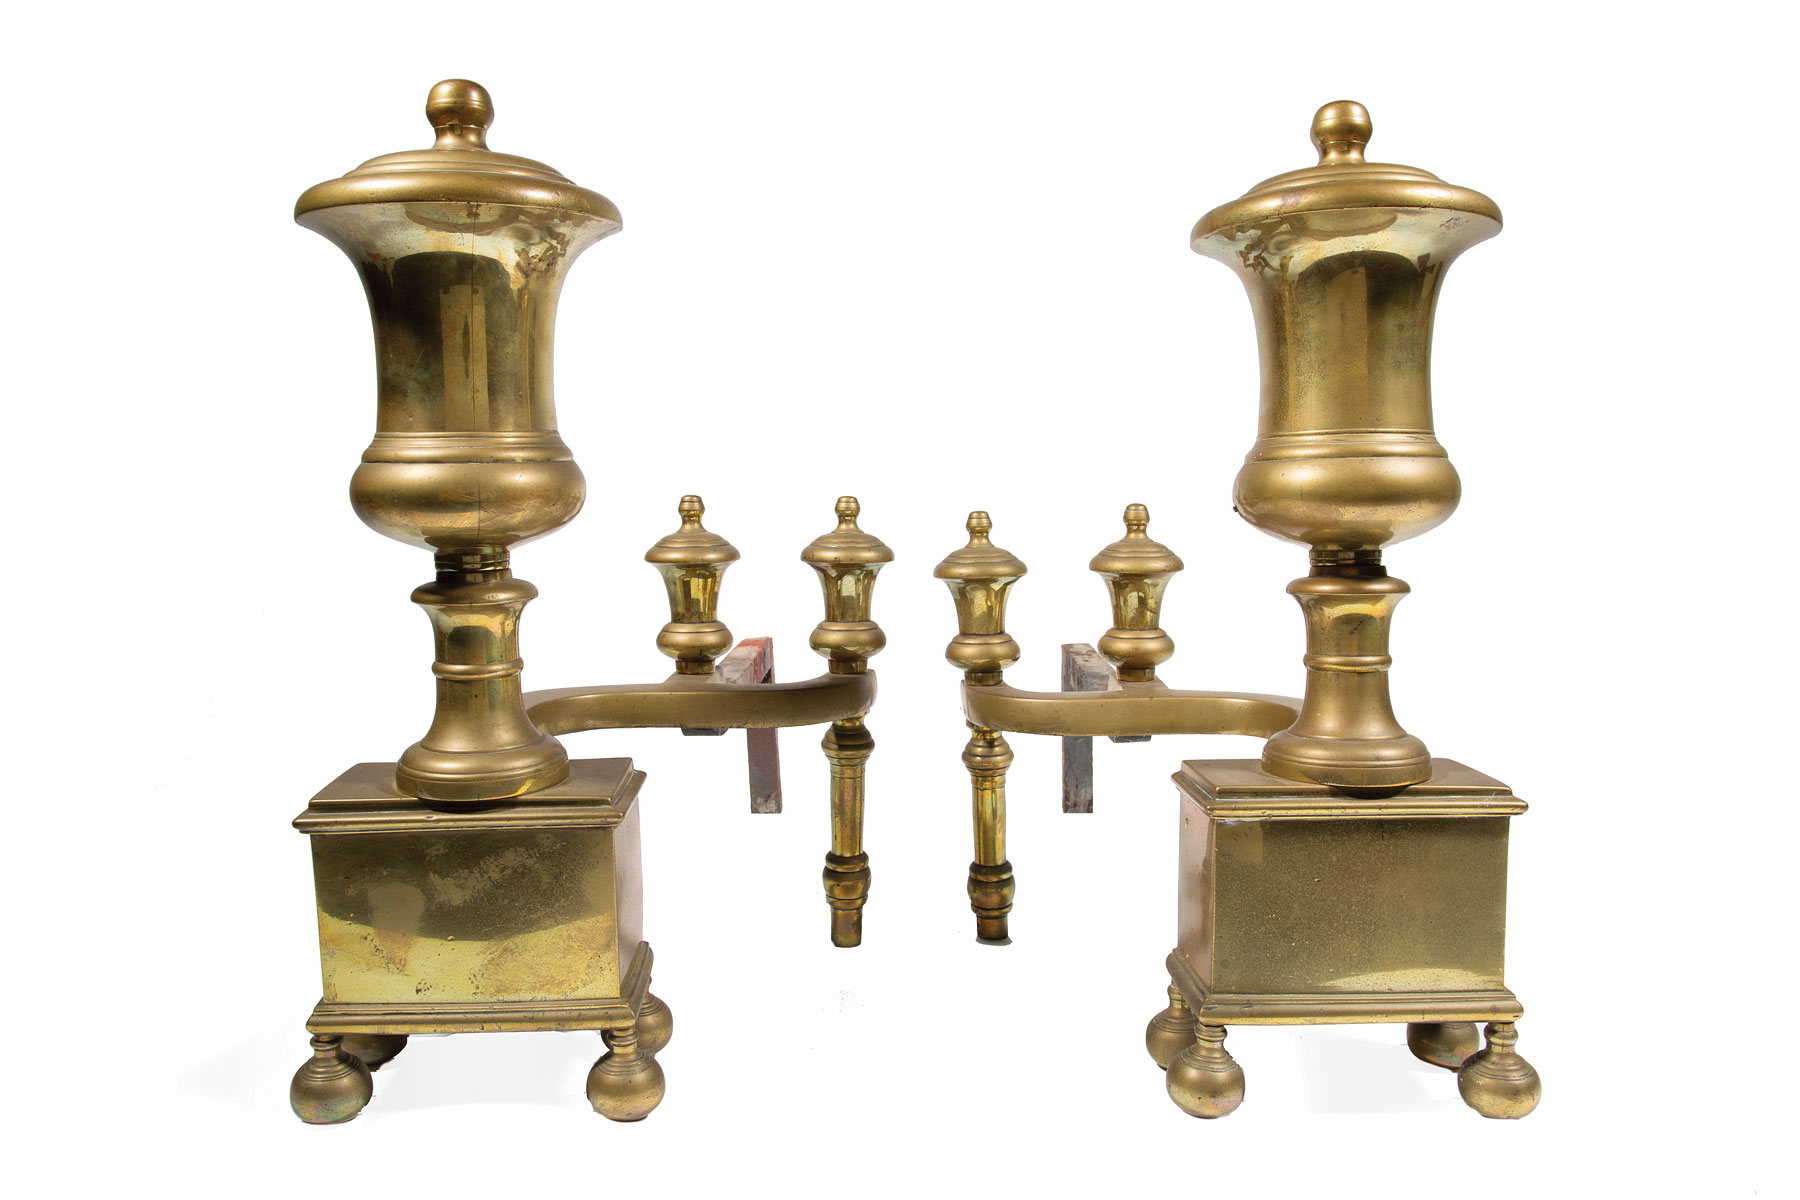 Pair of American Brass Urn-Form Andirons , 19th c., h. 17 in., w. 10 in., d. 23 in . Provenance: